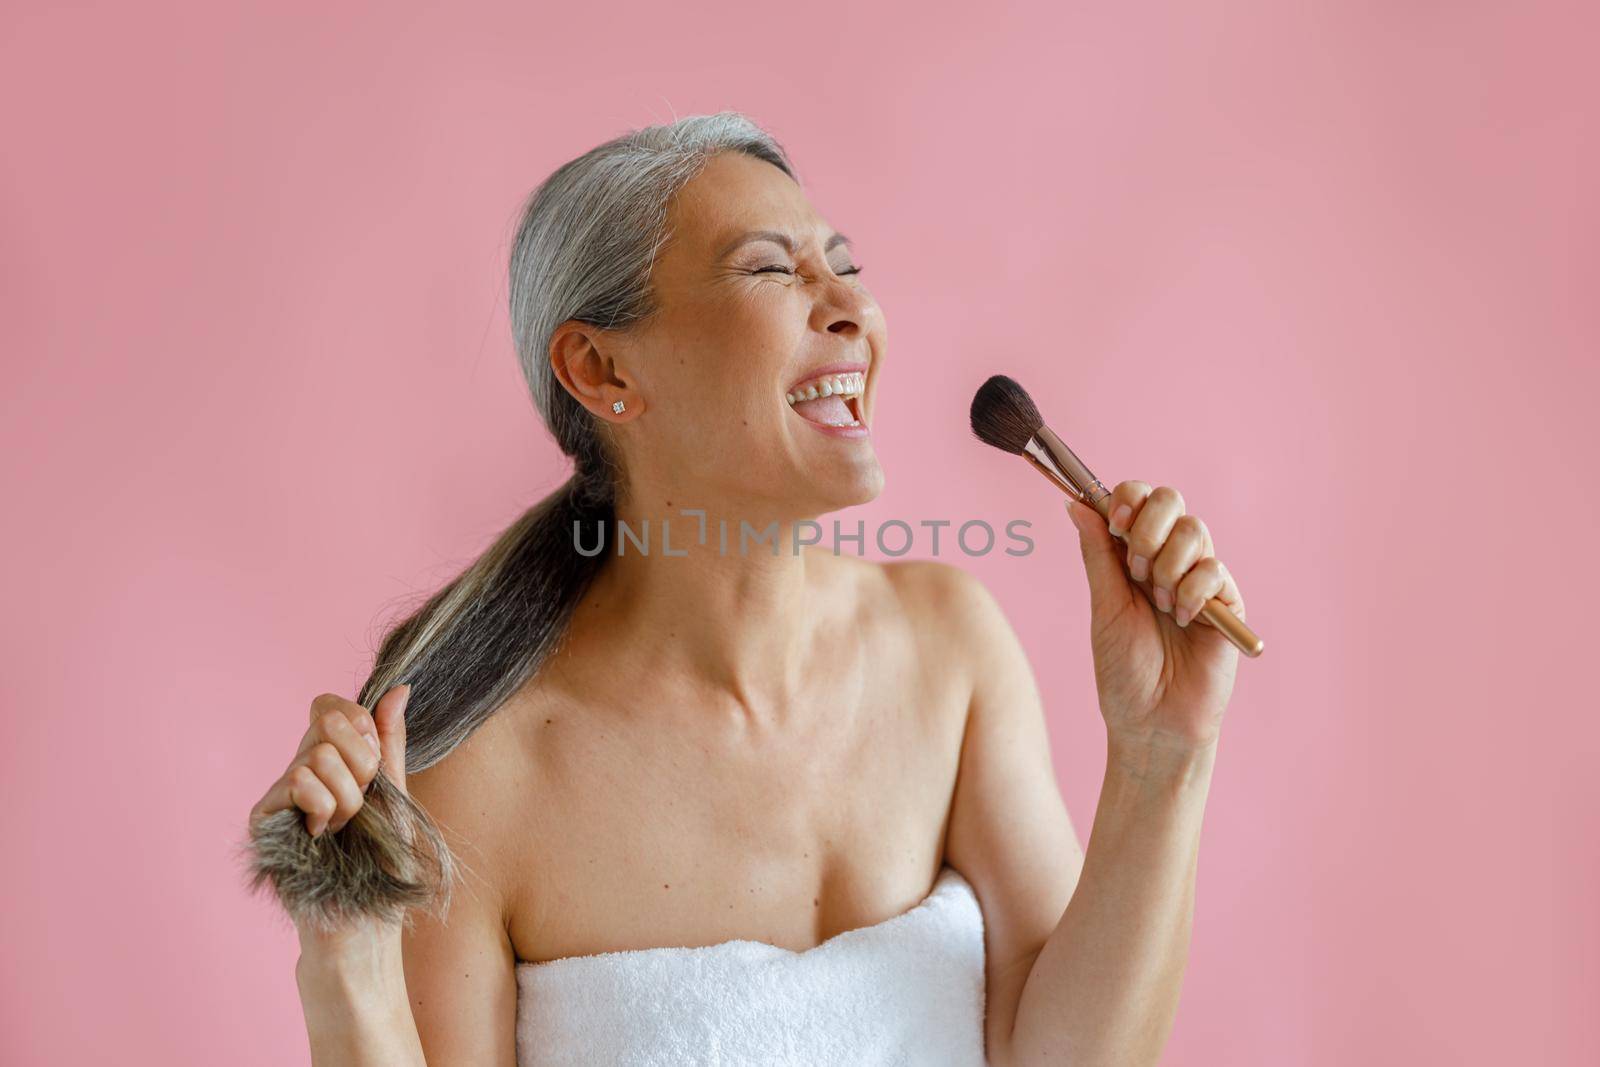 Jouful middle aged Asian woman sings song using cosmetic brush as microphone on pink background in studio. Mature beauty lifestyle